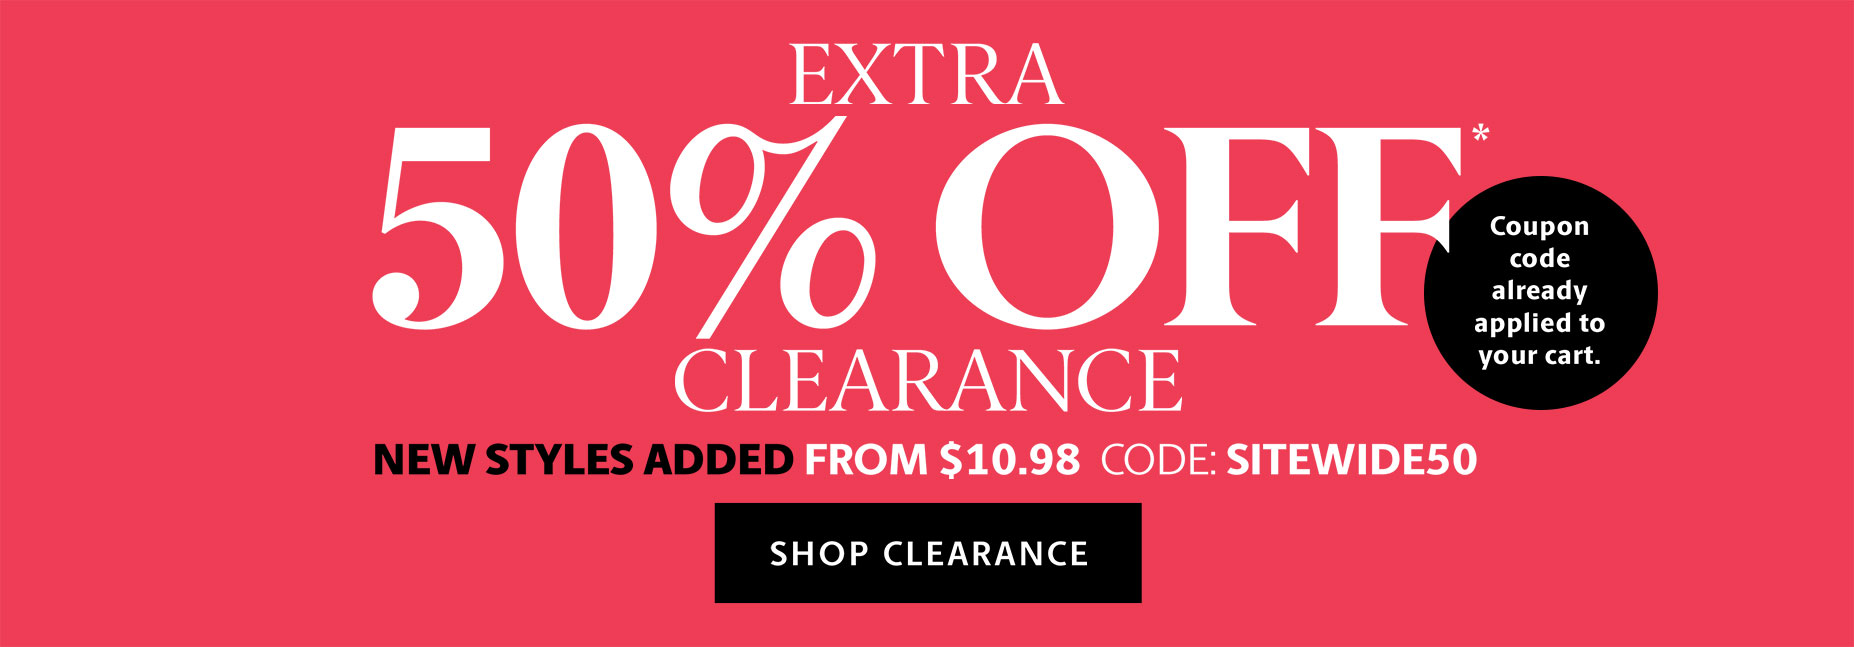 Clearance extra 50% Off